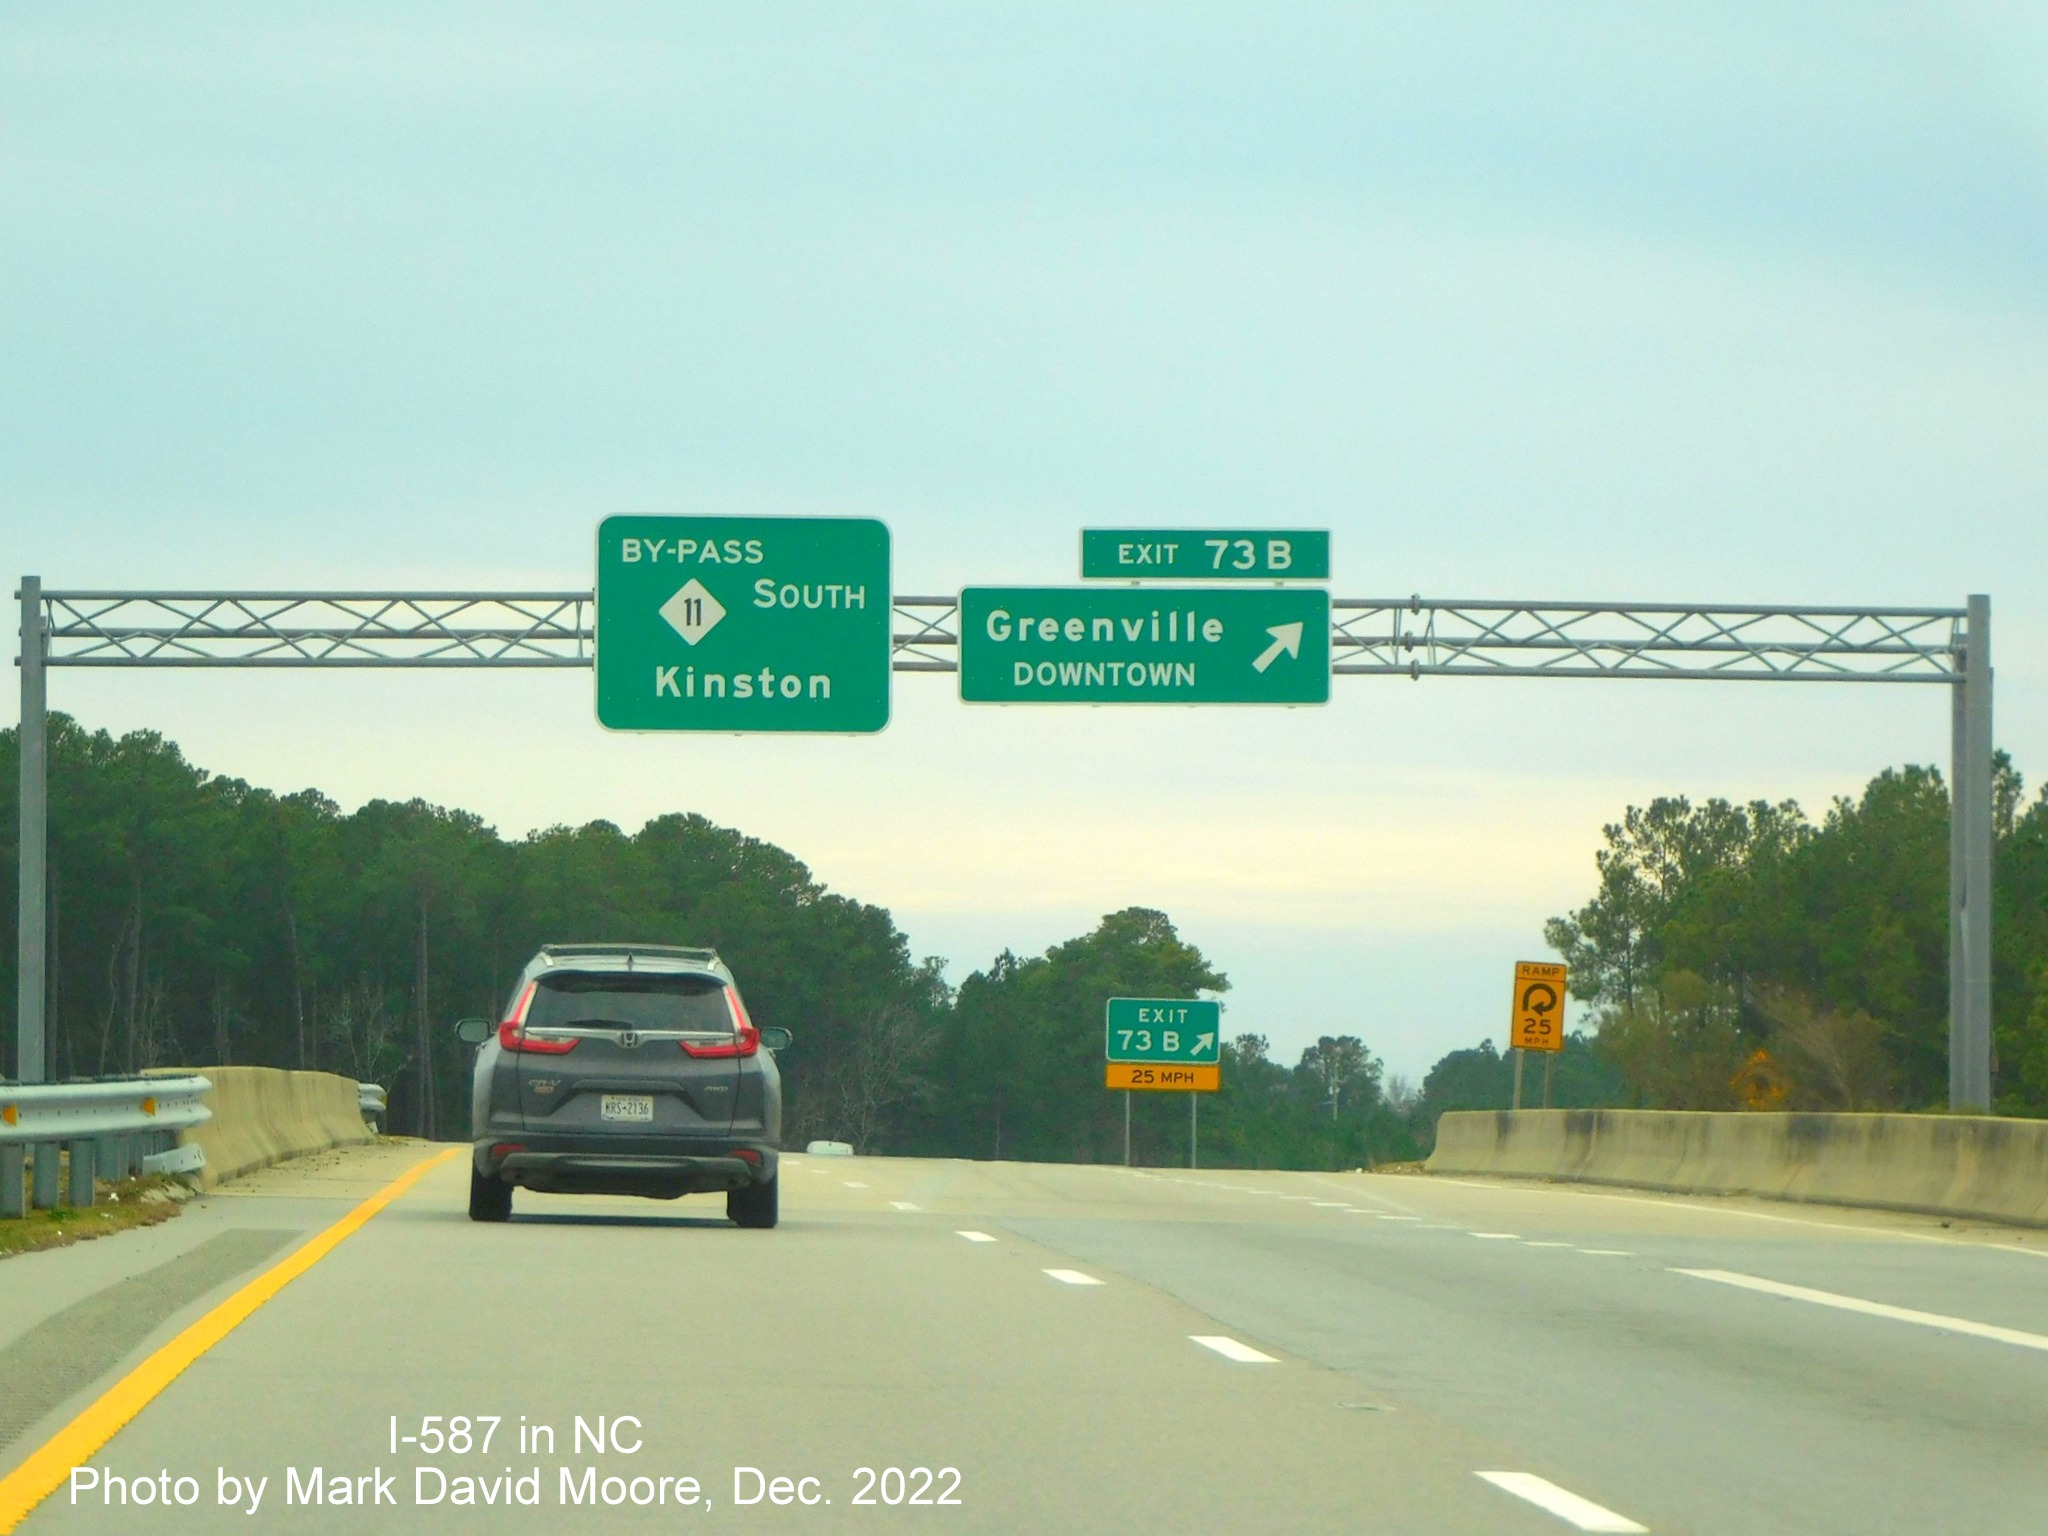 Image of overhead signaage for Downtown Greenville exit on US 264 East/NC 11 Bypass South in Greenville, photo by Mark David Moore, December 2022